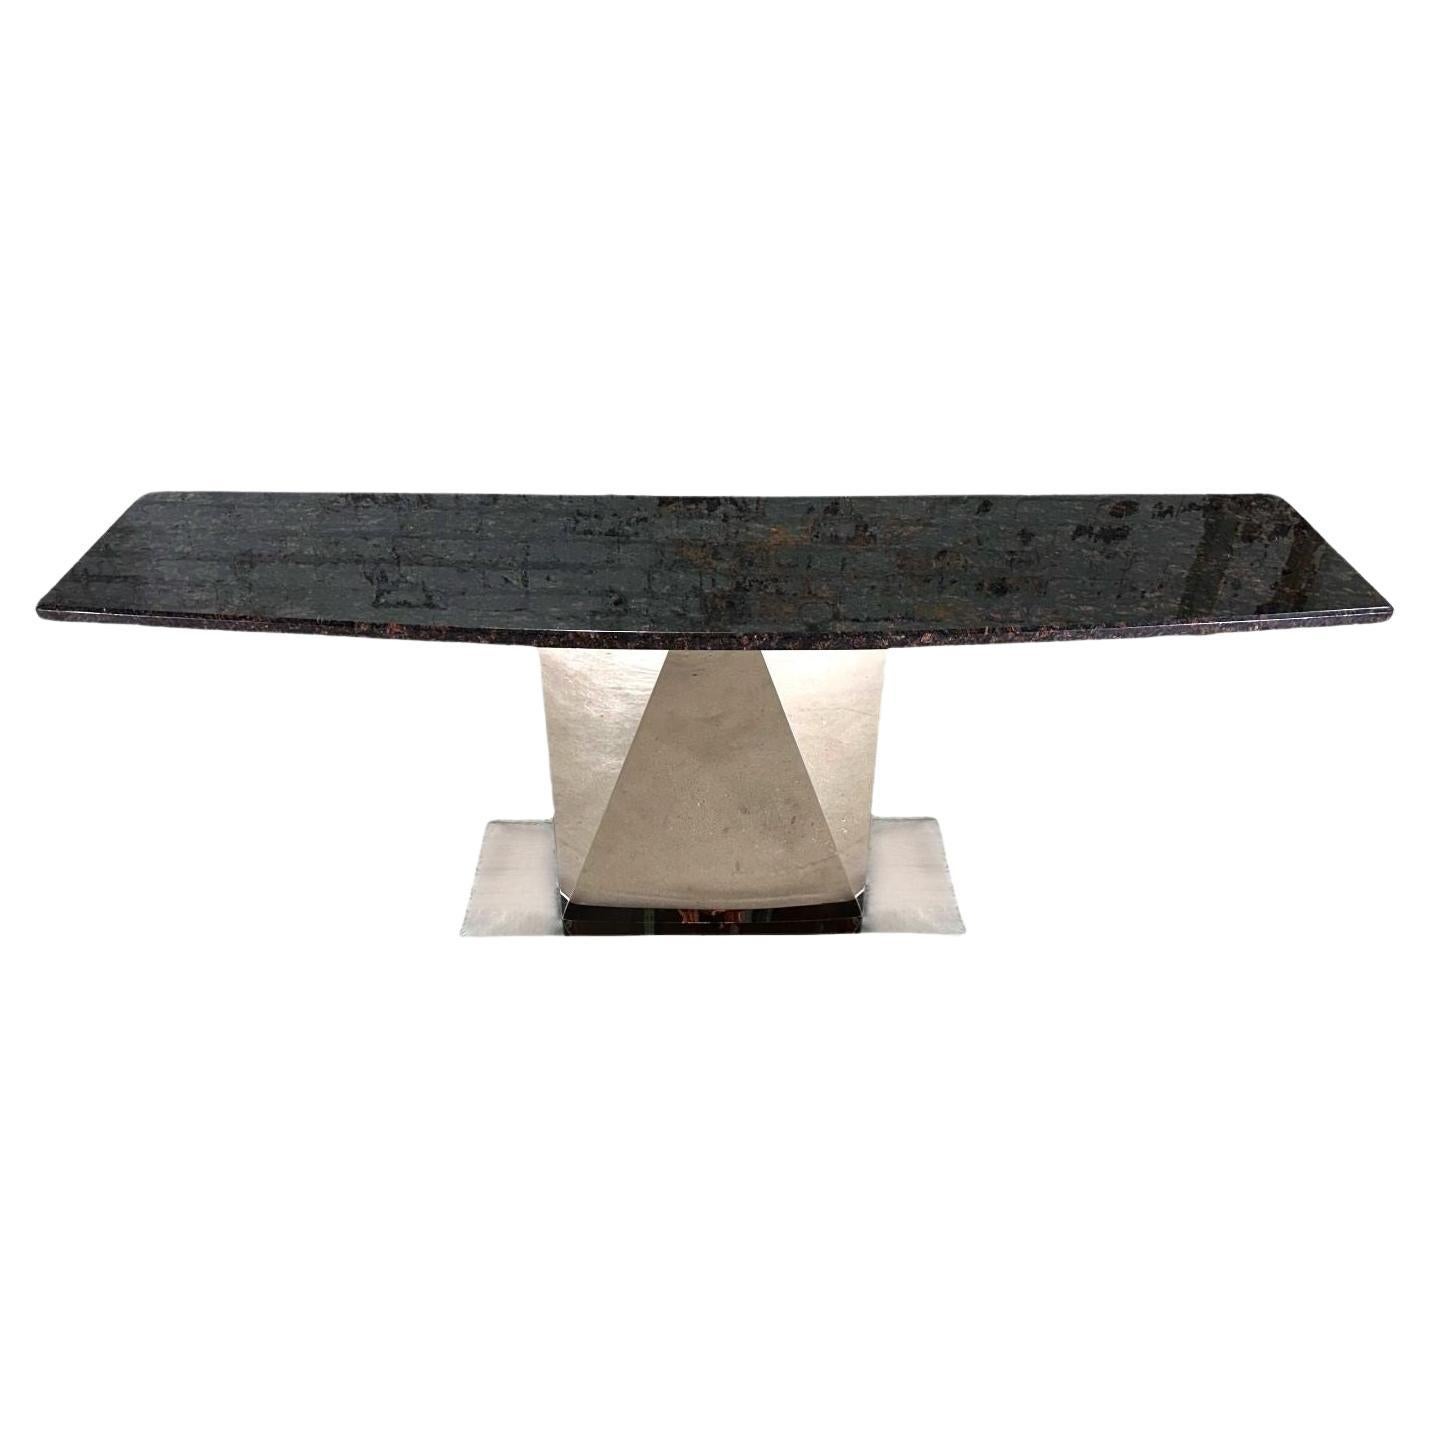 Sally Sirkin Style Multi Faceted Stainless Steel/Granite Console, 1970